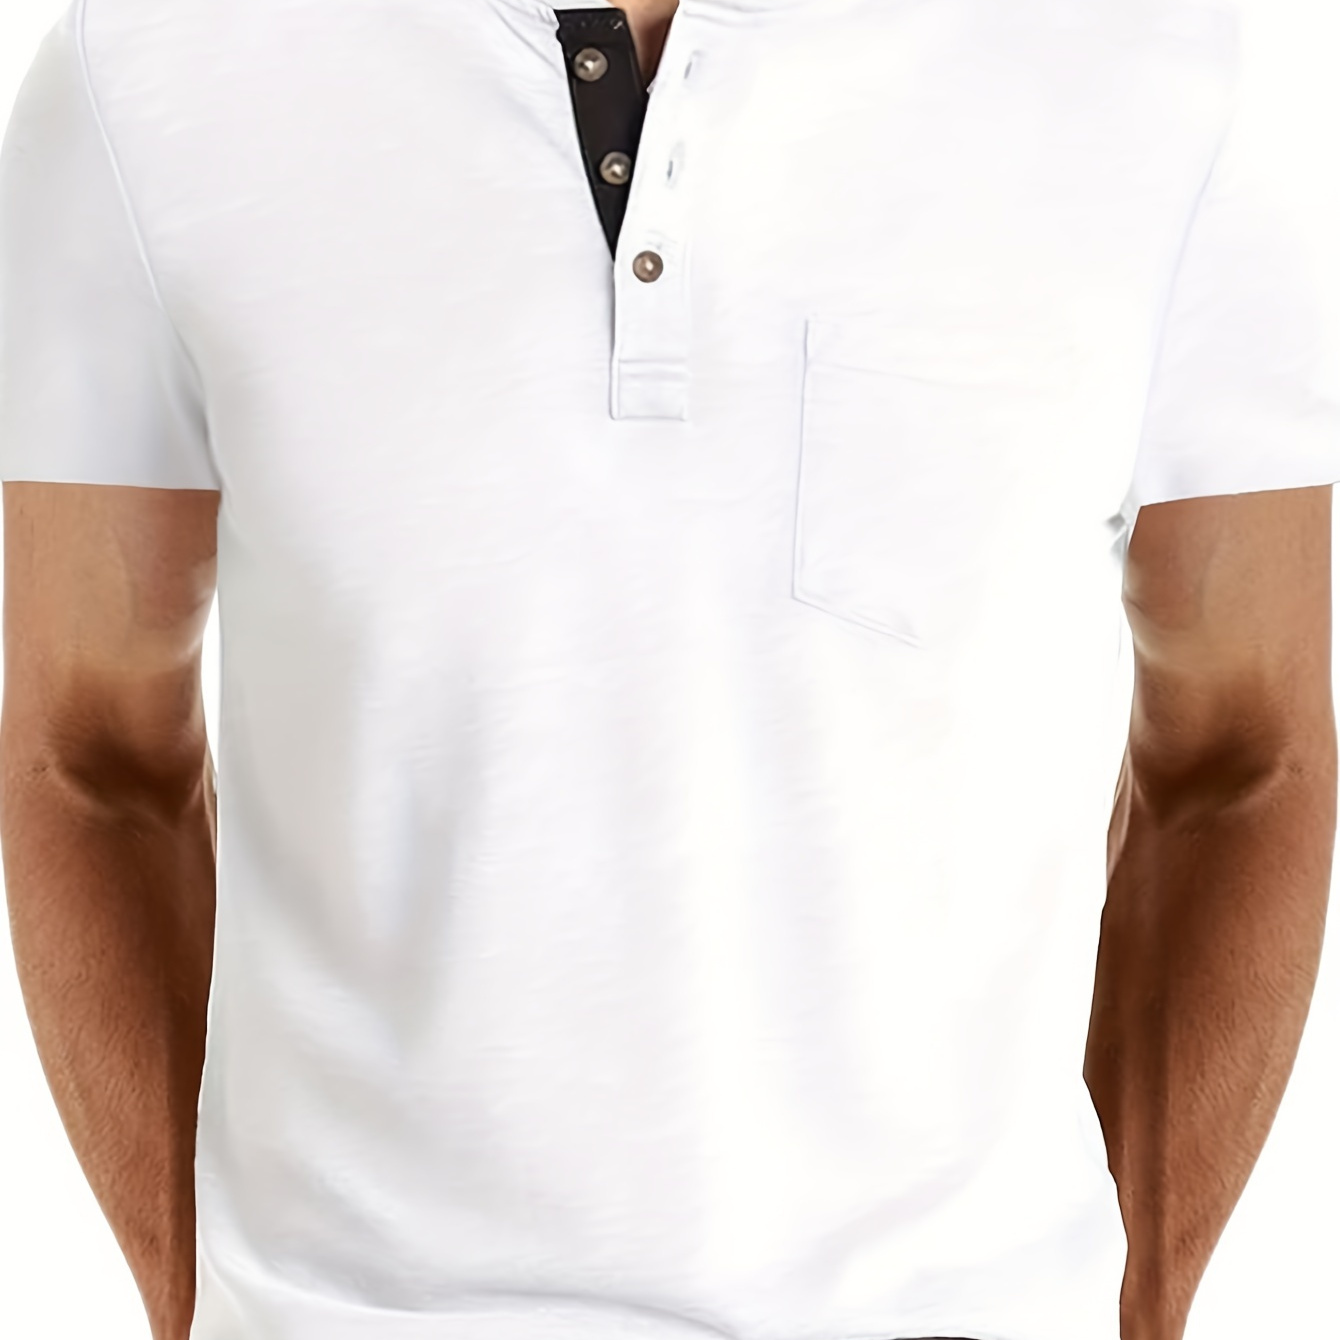 

Men's Fashion Henley Shirt, Short Sleeve Cotton Blend T-shirt With Button Closure And Chest Pocket, Casual Style Summer Top